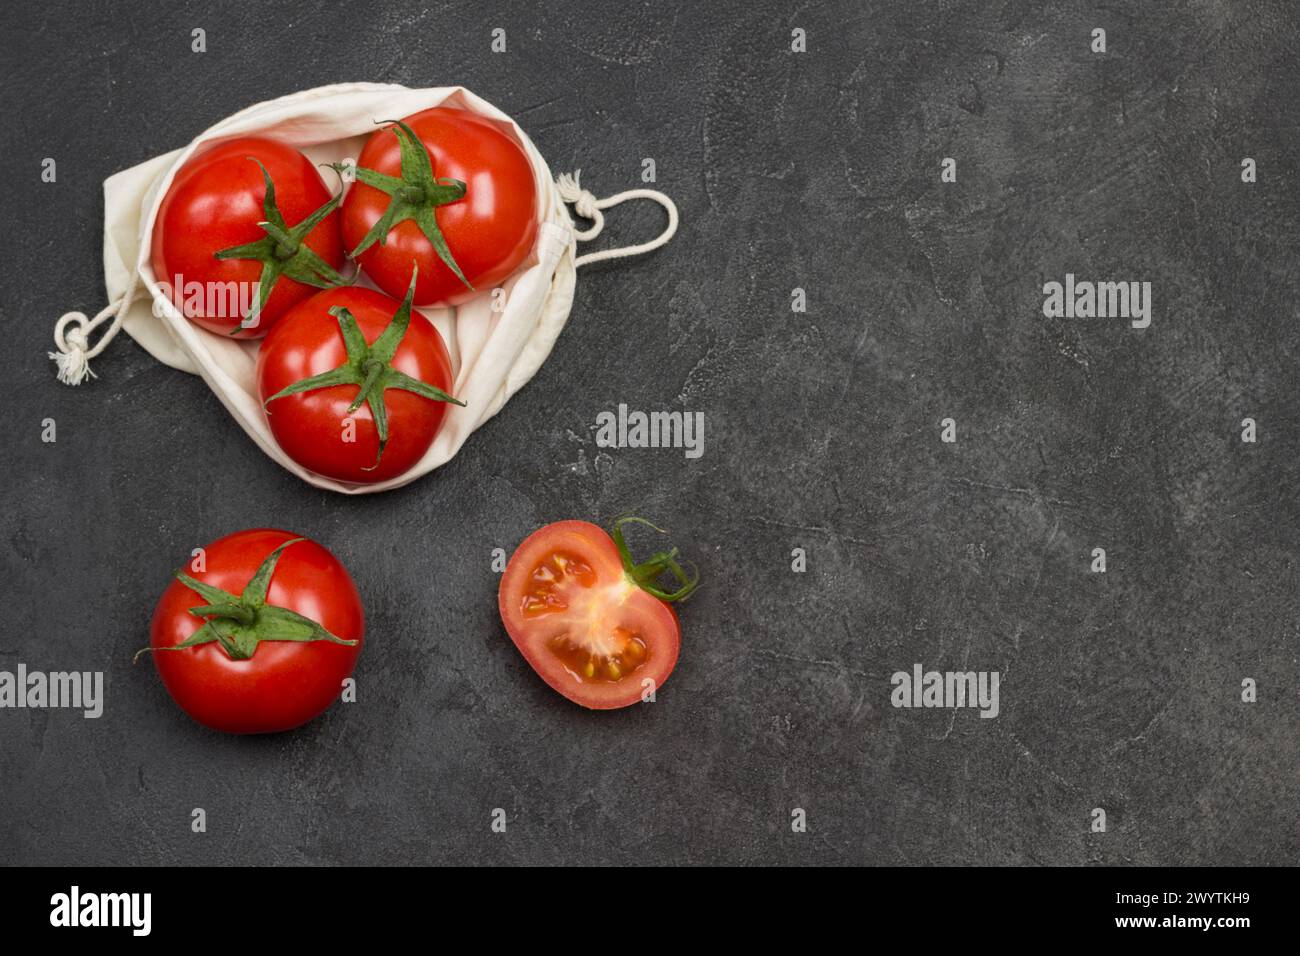 Tomatoes in  reusable mesh bag. Whole tomato and chopped tomato wedges on table. Black background. Top view. Copy space Stock Photo